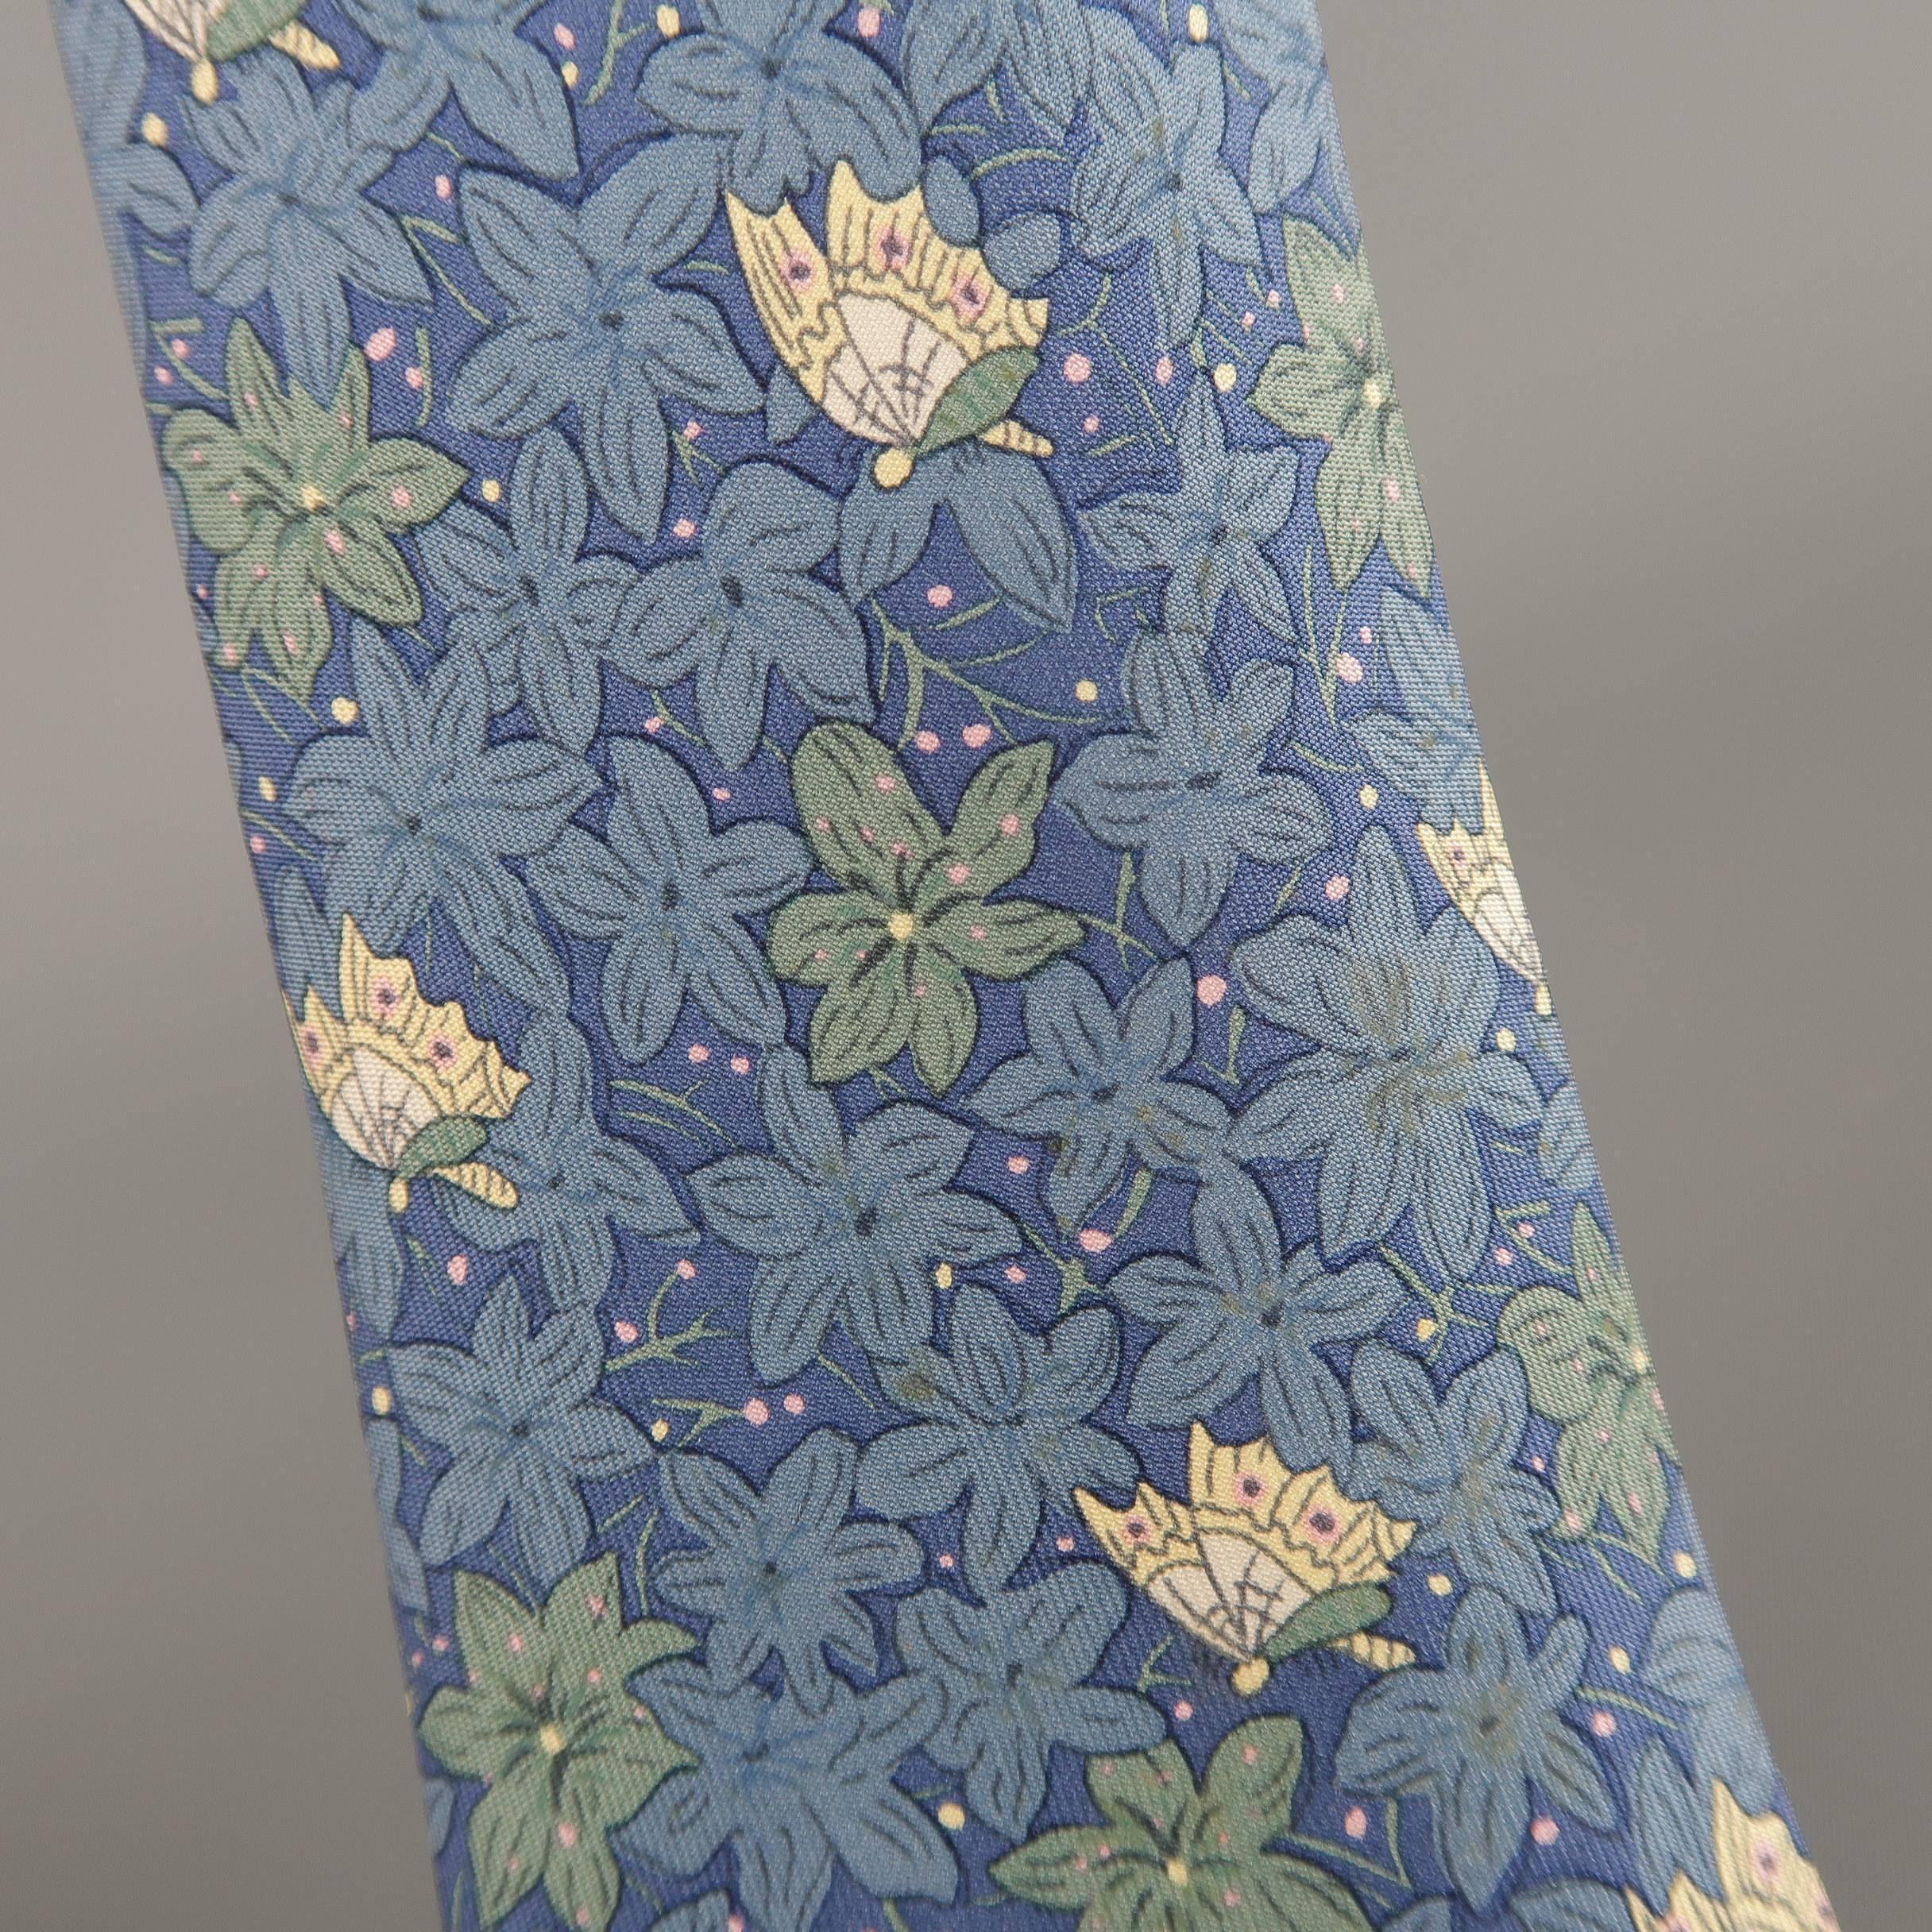 Vintage HERMES necktie comes in muted blue silk twill with all over teal and beige flower and butterfly print. Stains throughout. As-is. Made in France.
 
Fair Pre-Owned Condition.
 
Width: 3 in.
